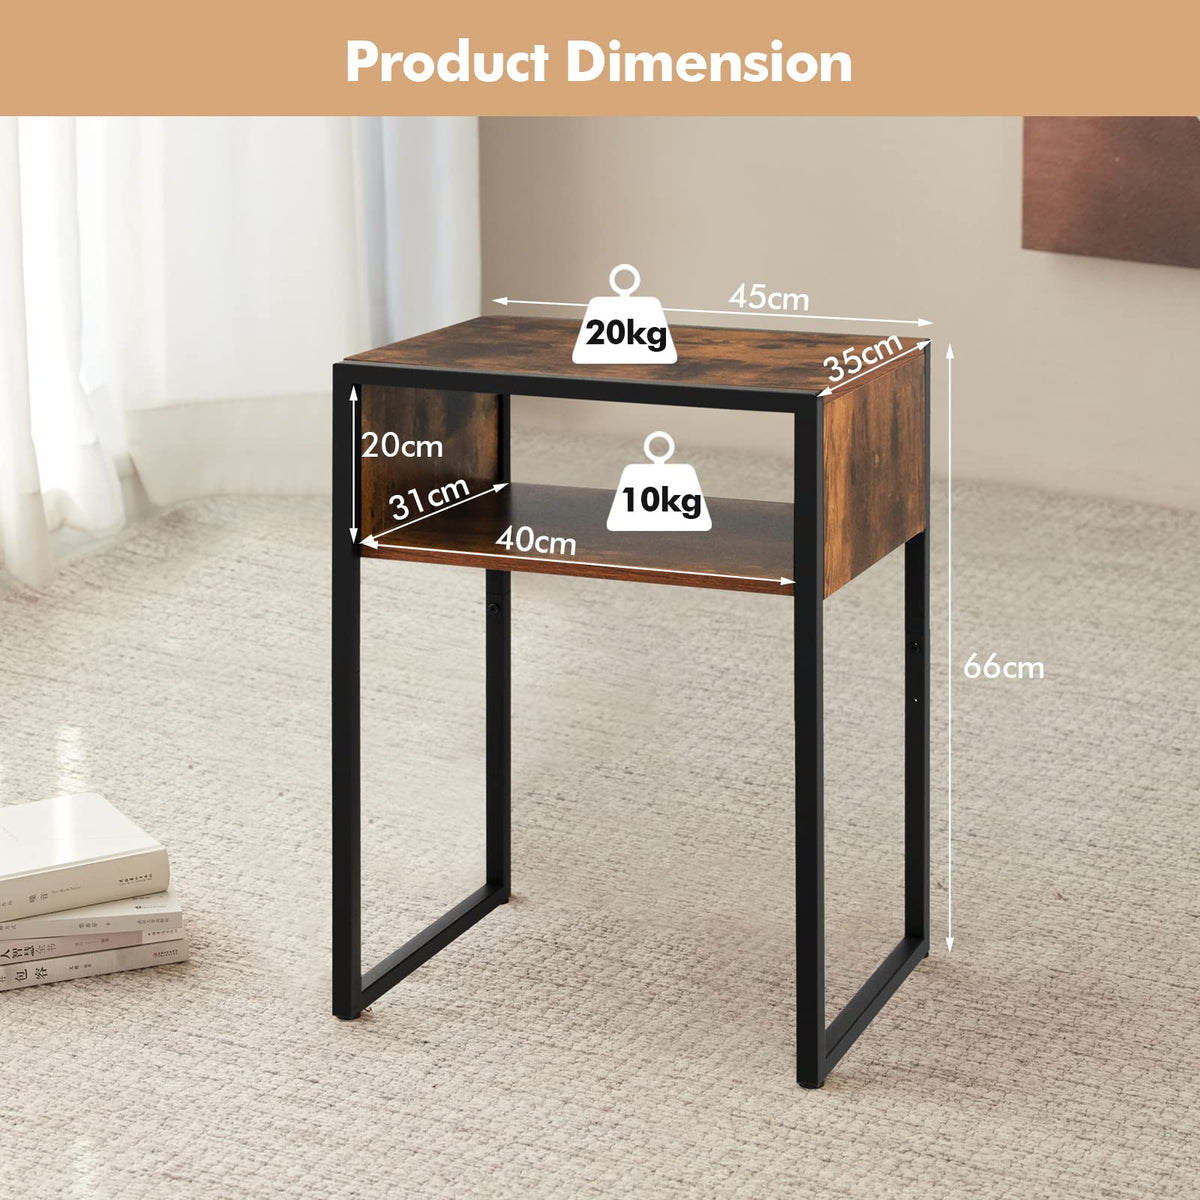 Giantex Industrial End Table, Retro Side Table with 2-Tier Open Storage Shelf, Rustic Brown